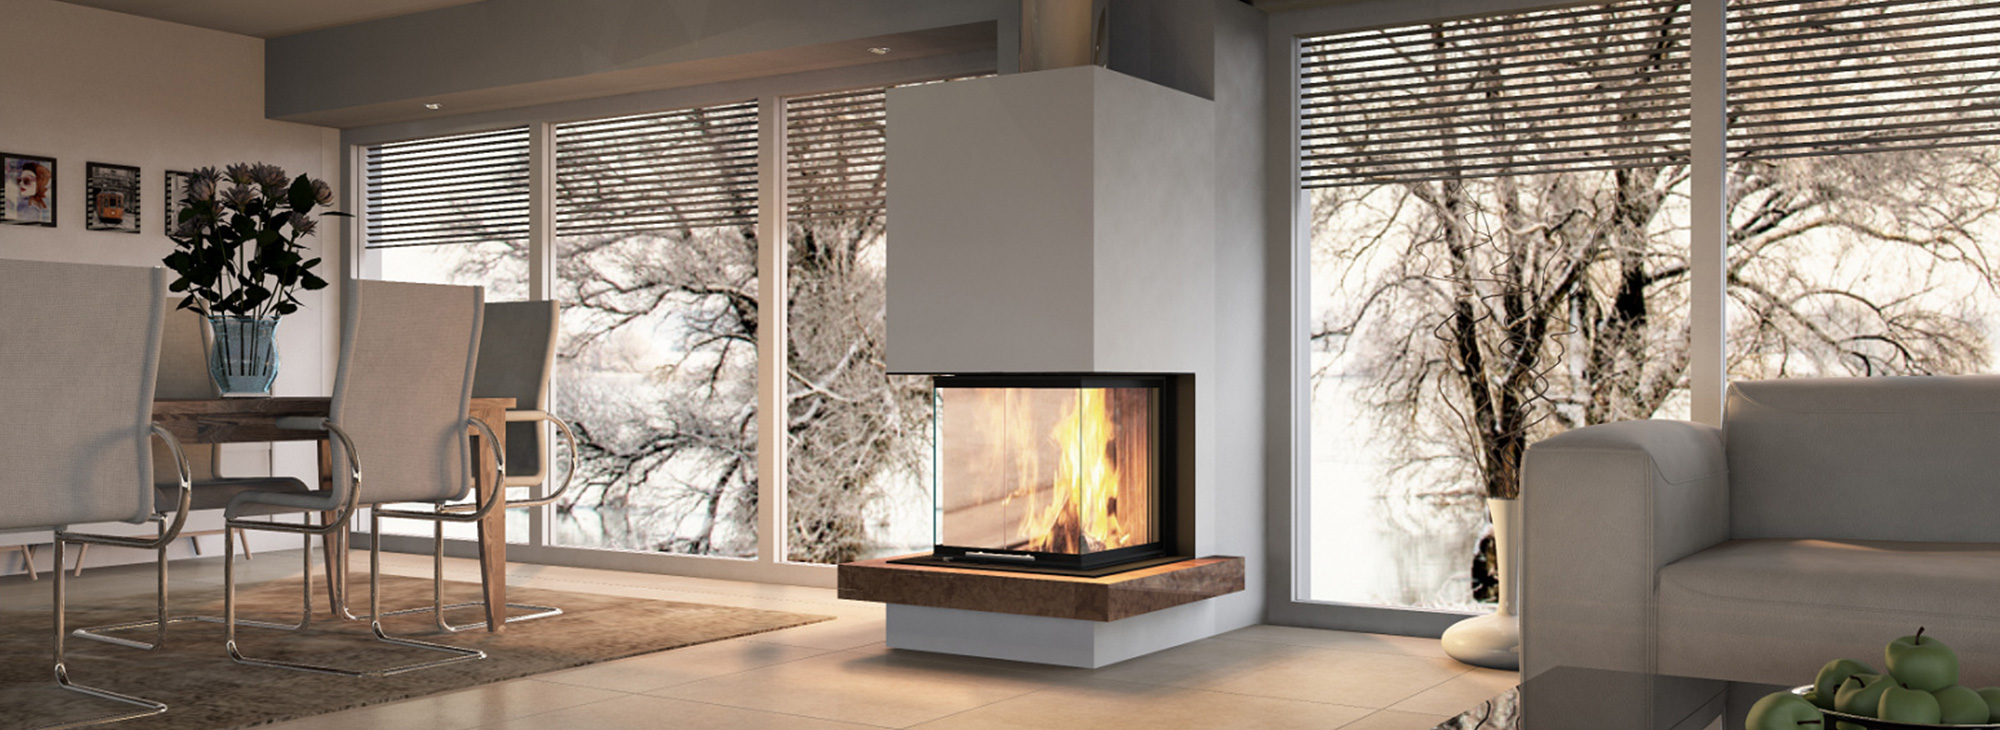 SILCA® 250 KM is the approved calcium silicate board for fireplace and tiled stove construction.